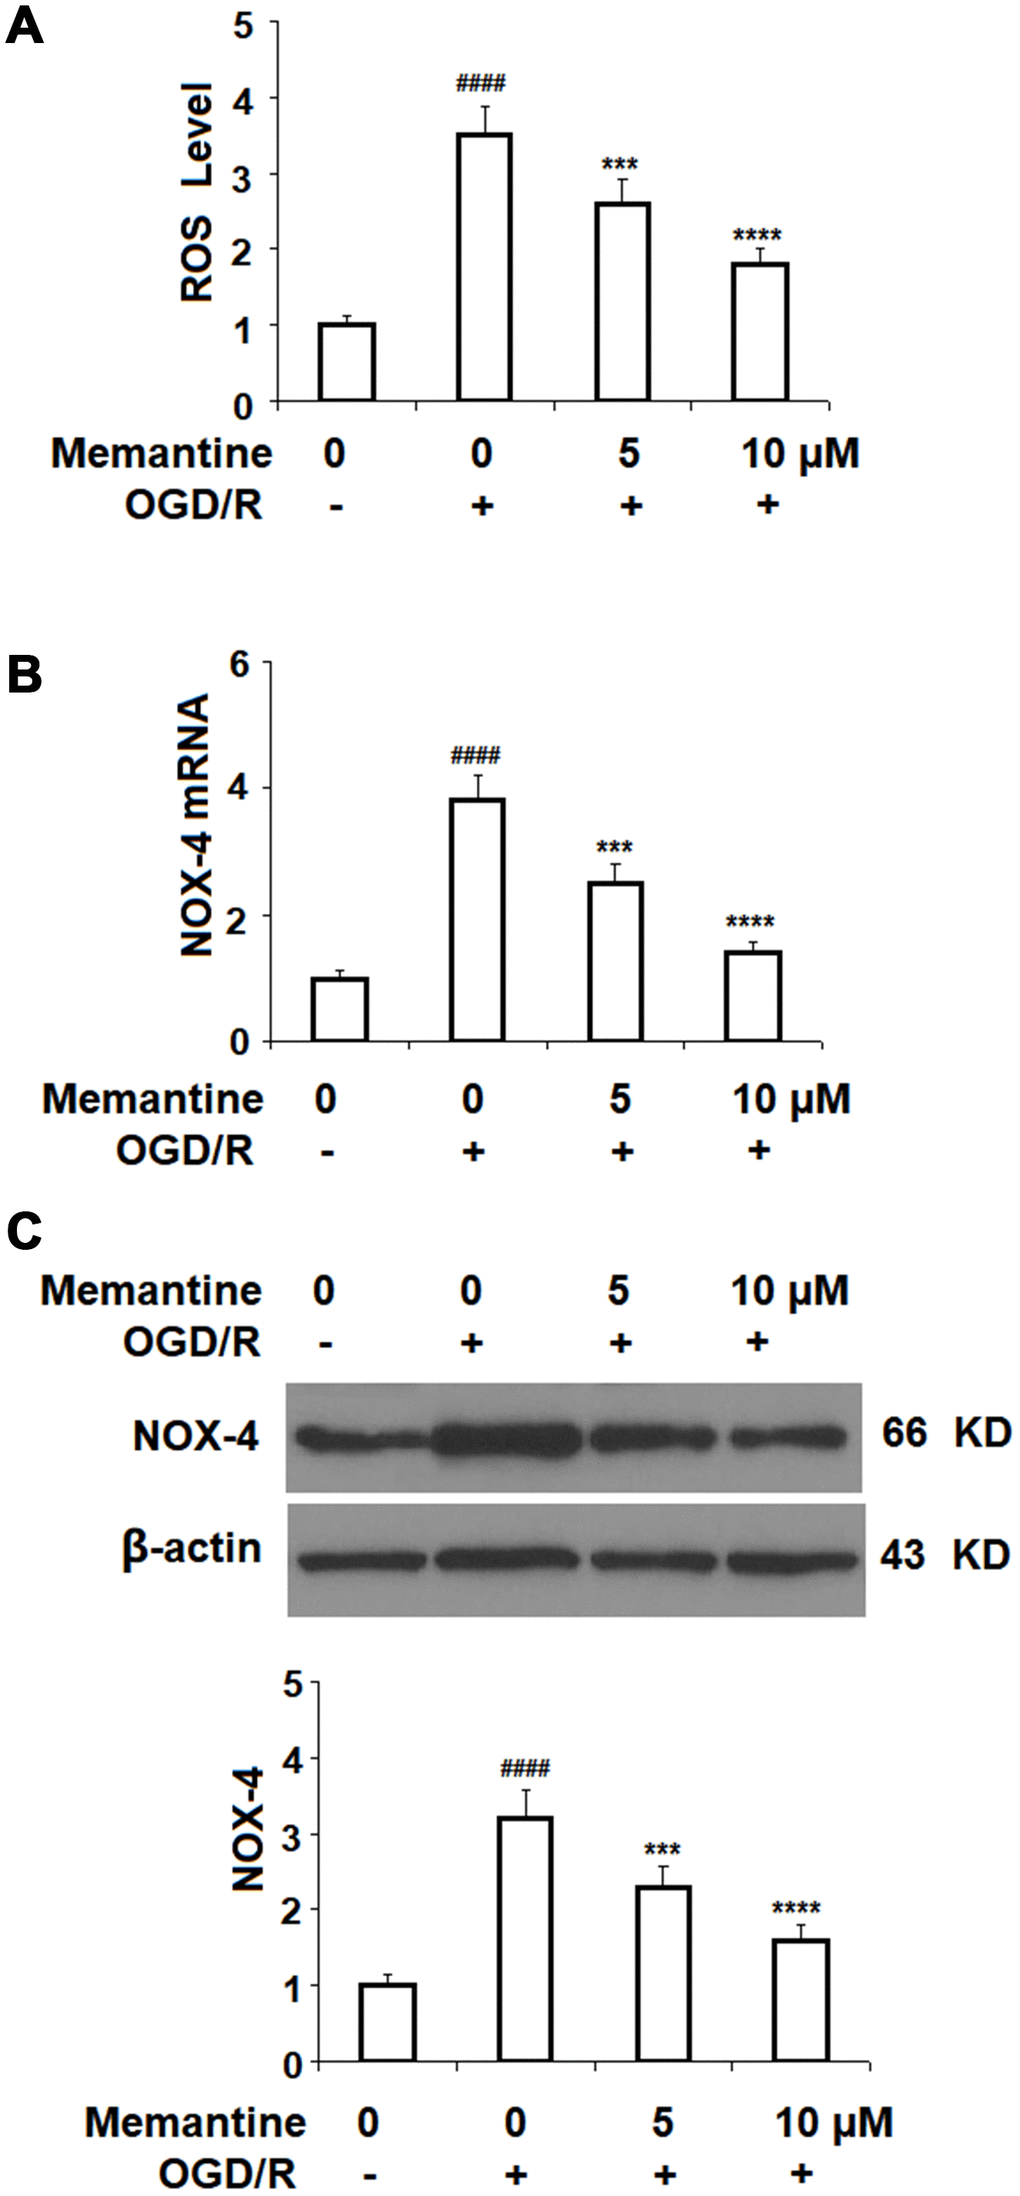 Memantine suppressed oxygen-glucose deprivation/reperfusion-induced oxidative stress in human umbilical vein endothelial cells (HUVECs). Cells were treated with memantine (5, 10 μM) for 6 h, followed by exposure to oxygen-glucose deprivation (6 h)/reperfusion (24 h) (OGD/R). (A) Intracellular ROS was measured by dihydroethidium (DHE); (B) mRNA of NOX-4 as measured by real-time PCR; (C) Protein of NOX-4 as measured by western blot analysis (####, P